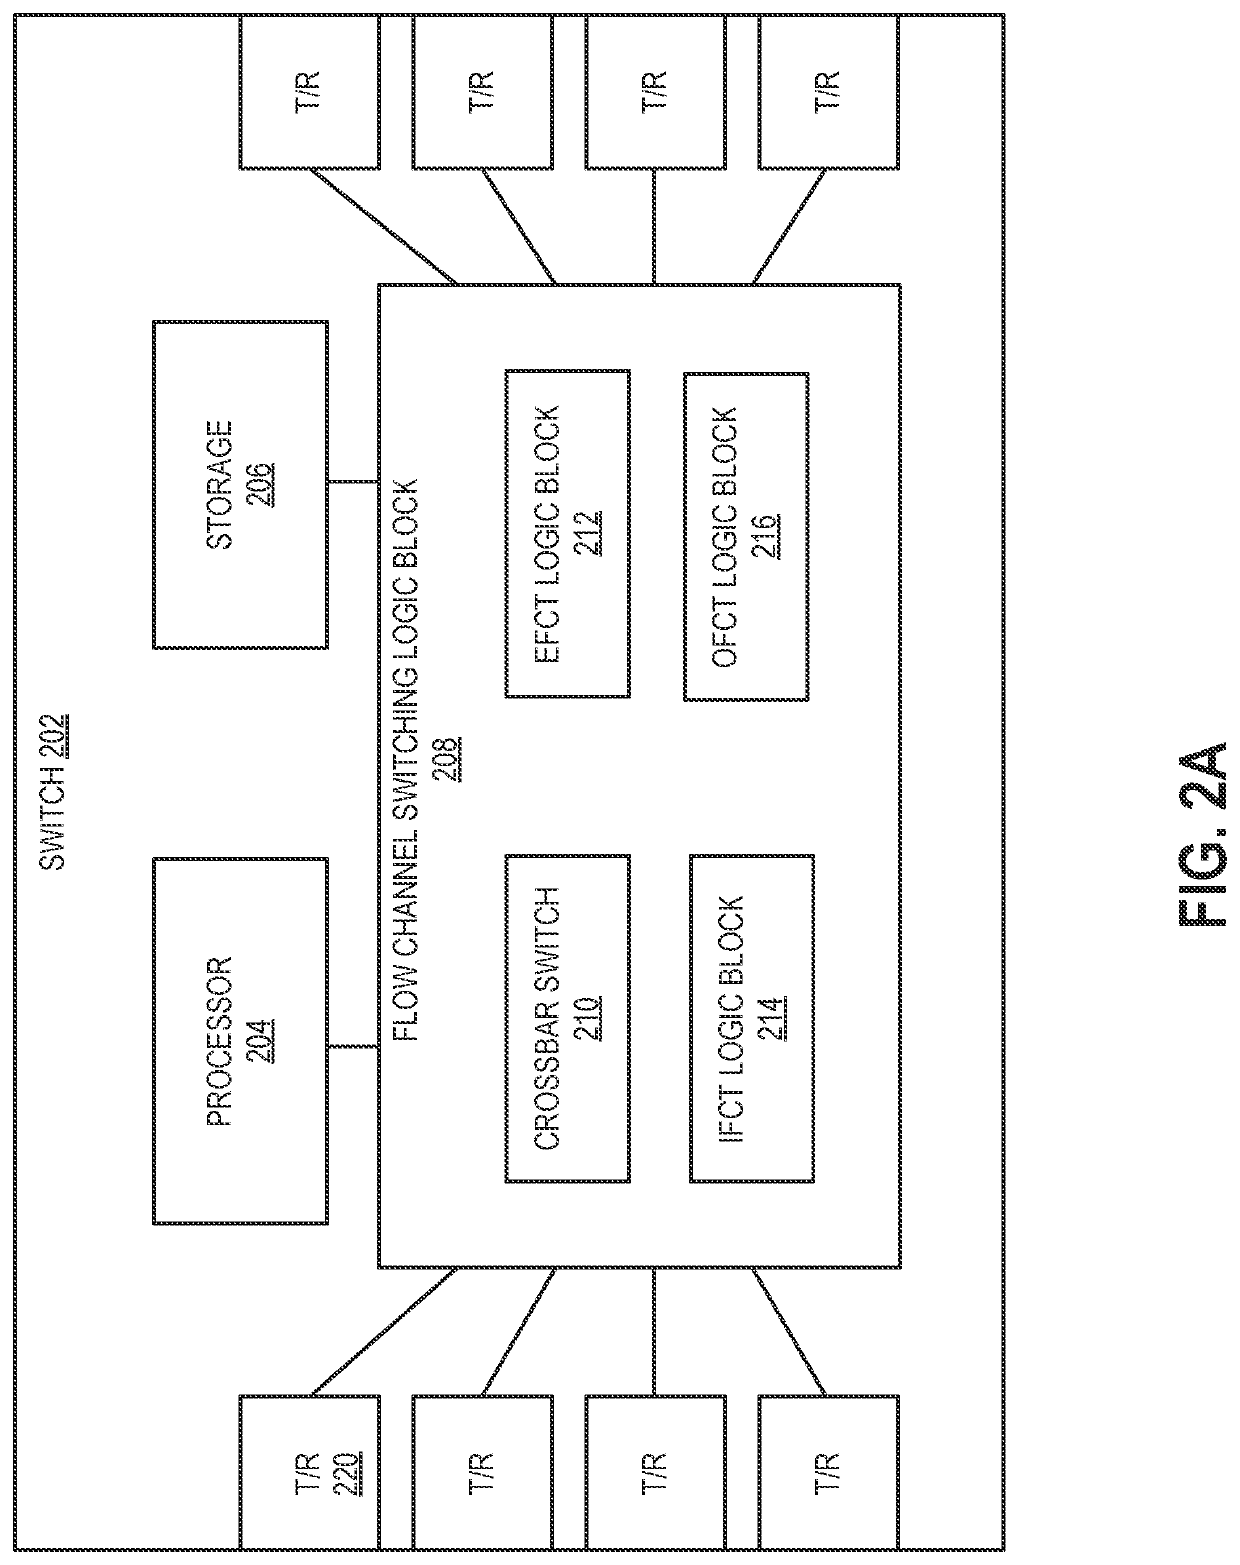 Optimized adaptive routing to reduce number of hops